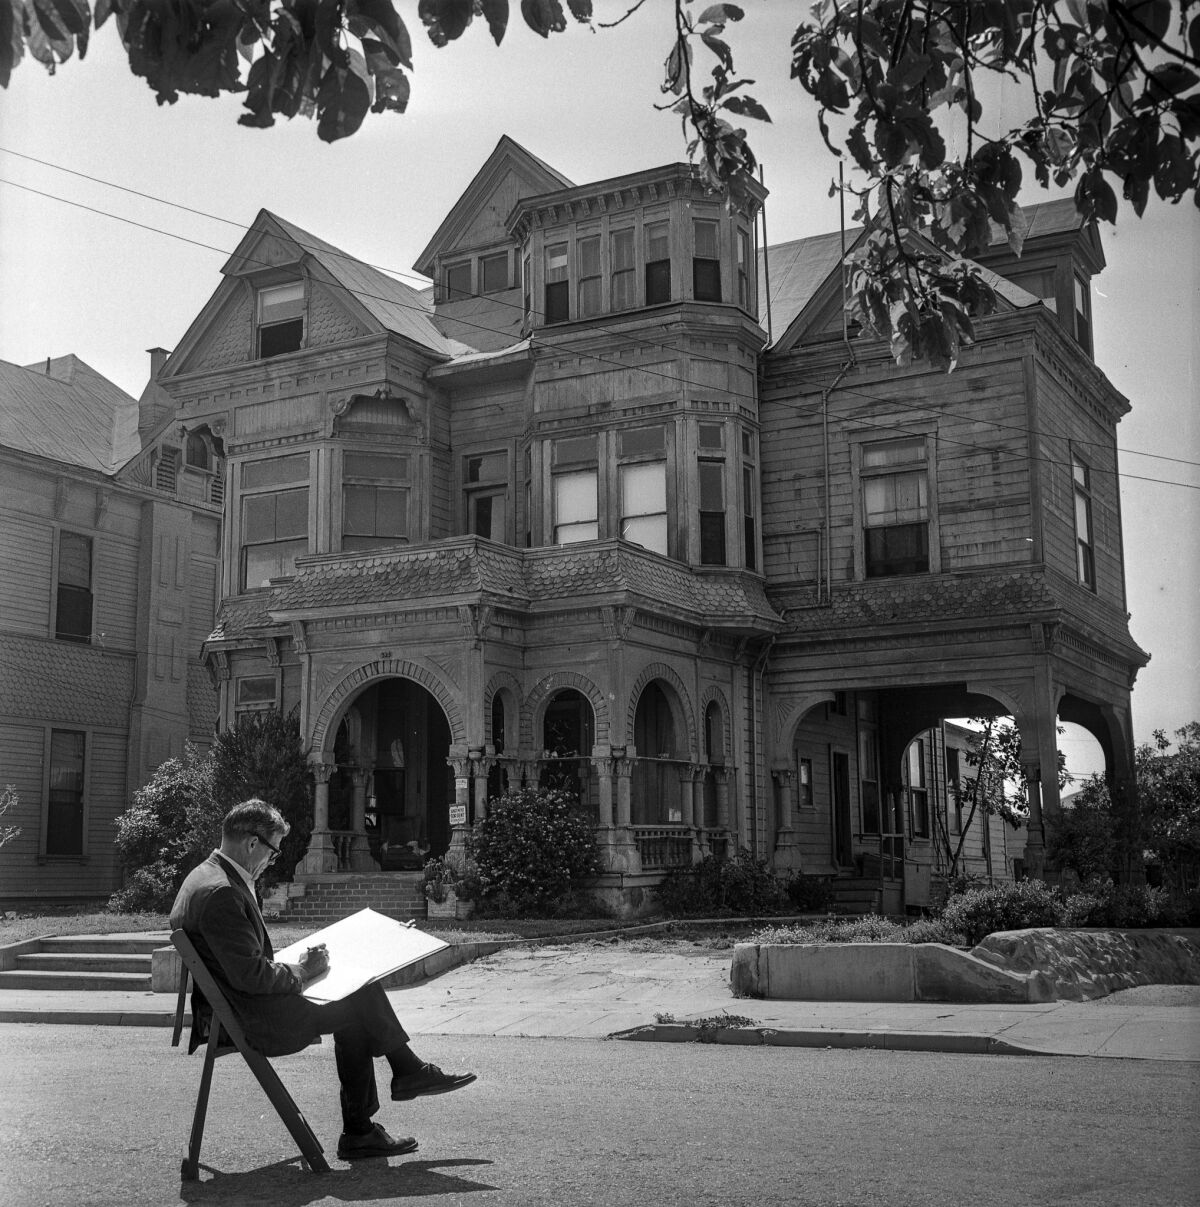 Leo Politi sketches the Victorian home known as the Castle in 1964. The Wells Fargo Center on Grand Avenue has since replaced it.